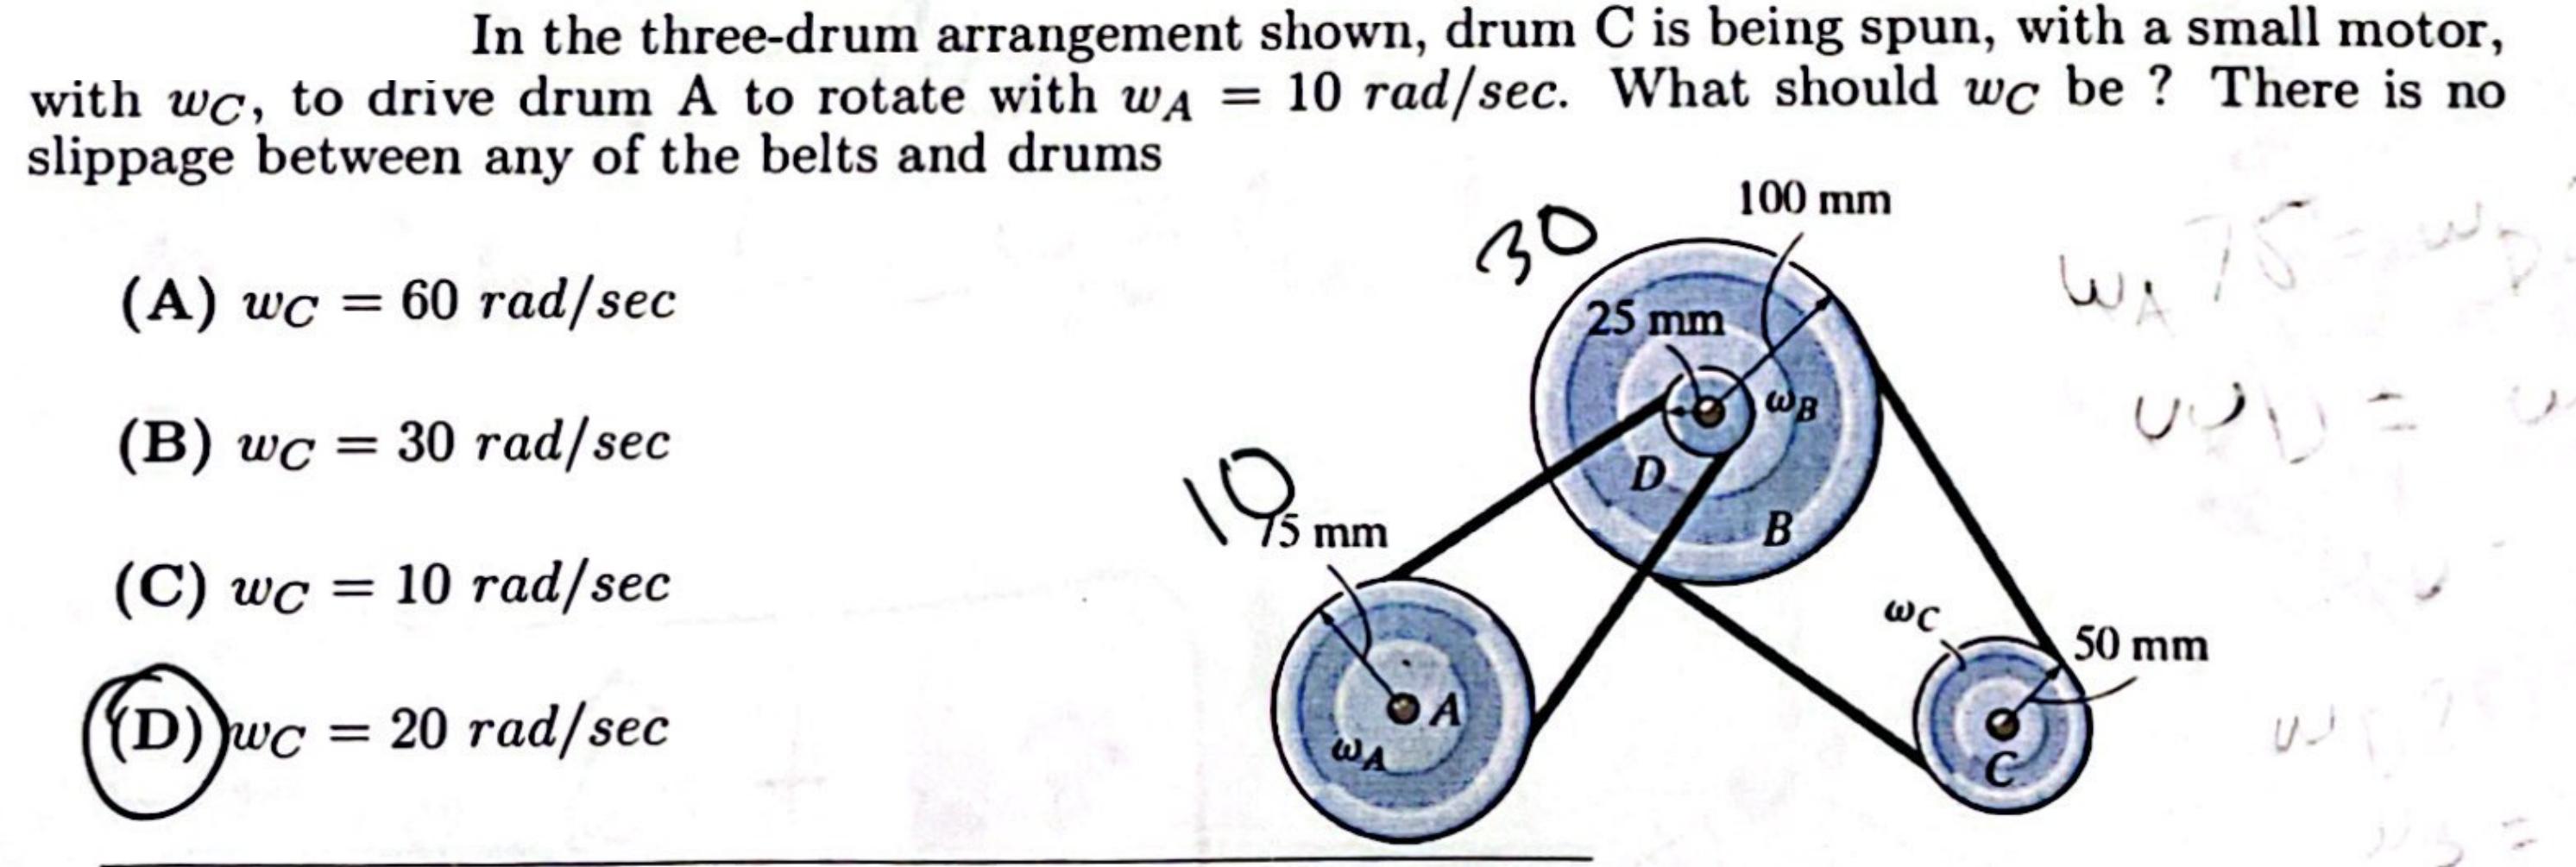 In the three-drum arrangement shown, drum C is being spun, with a small motor, with wc, to drive drum A to